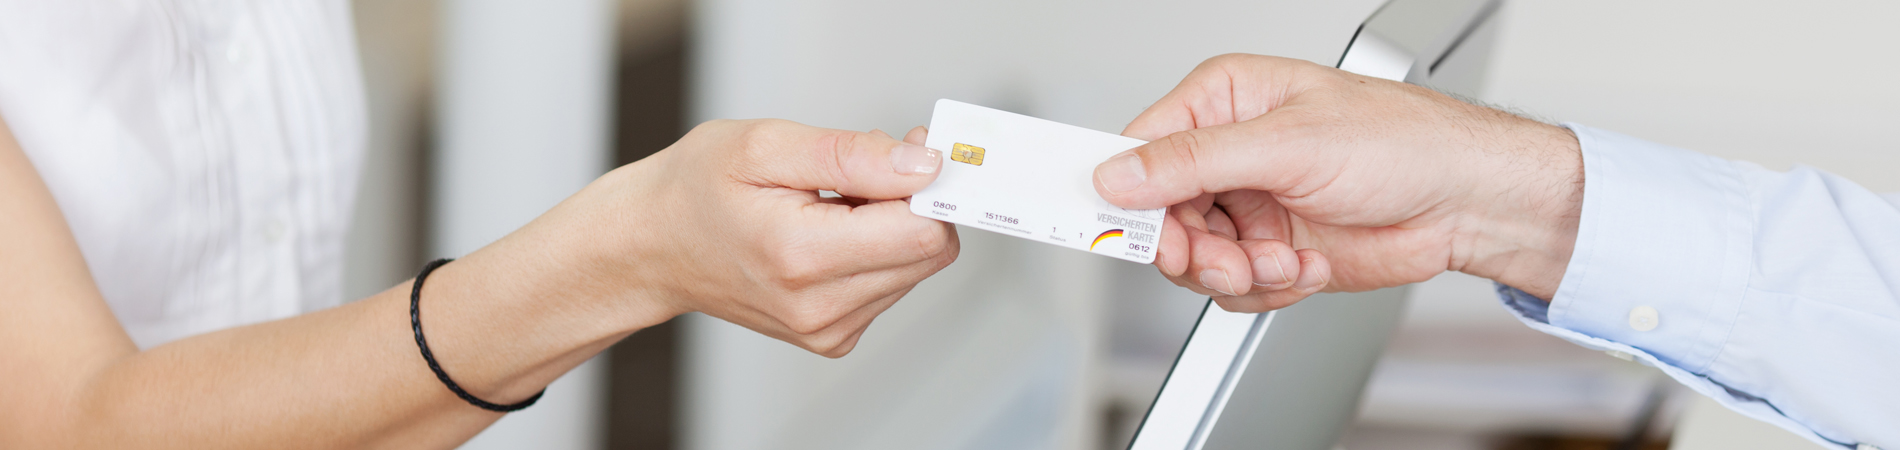 Patient experience improved through ability to play via debit card for service.